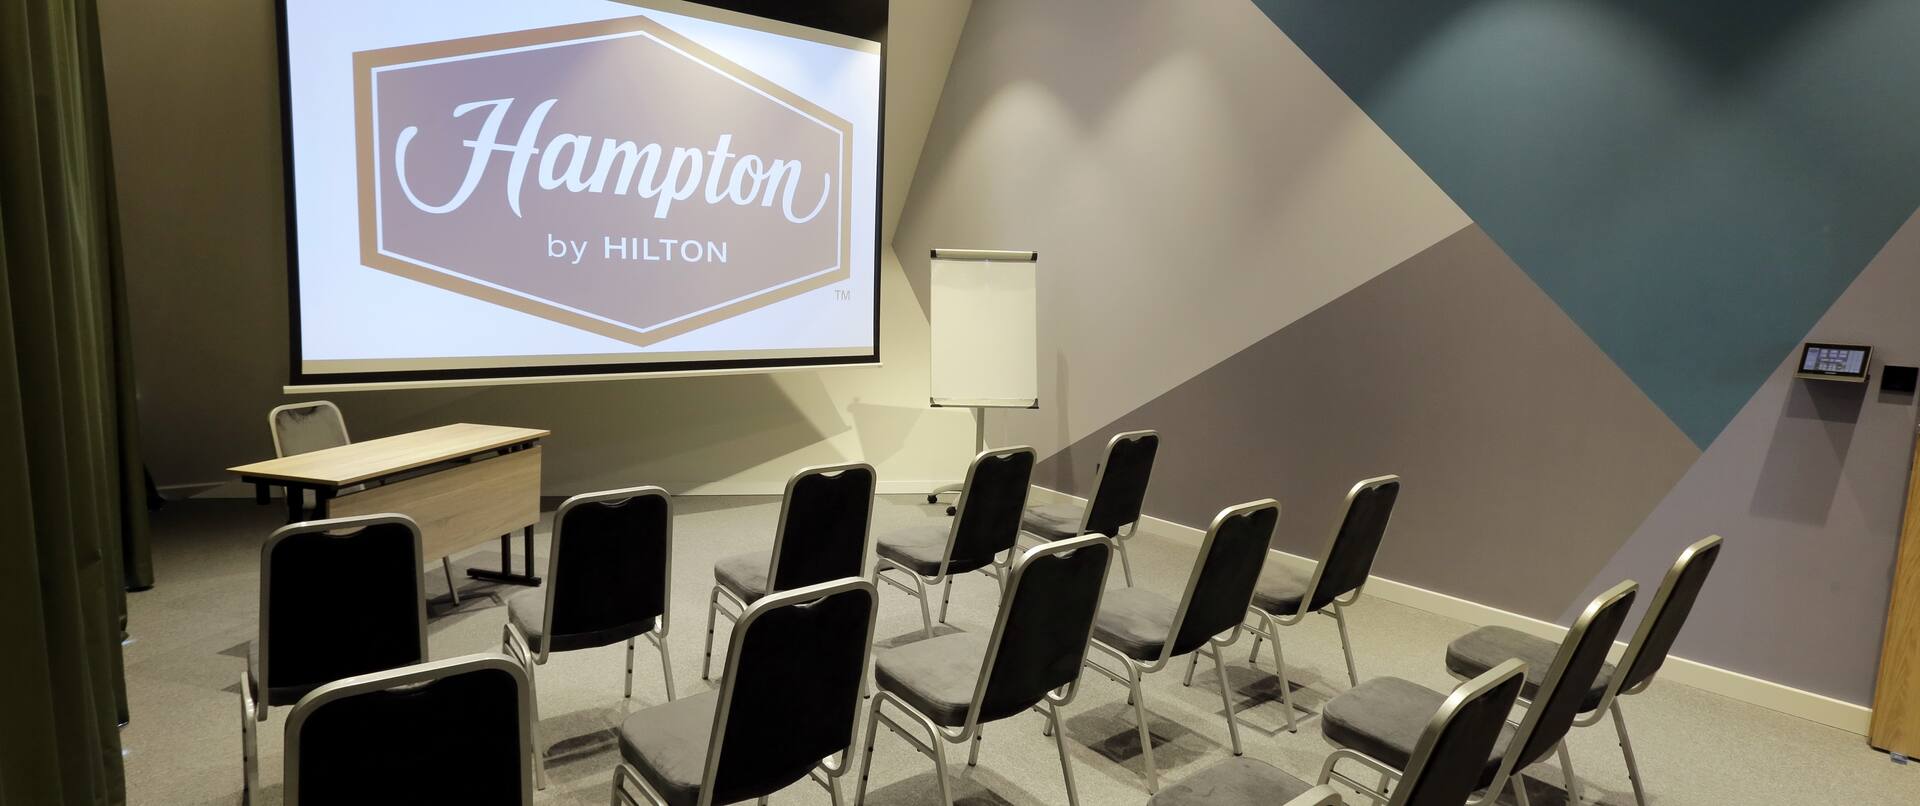 Meeting Room Setup Theater Style with Projection Screen